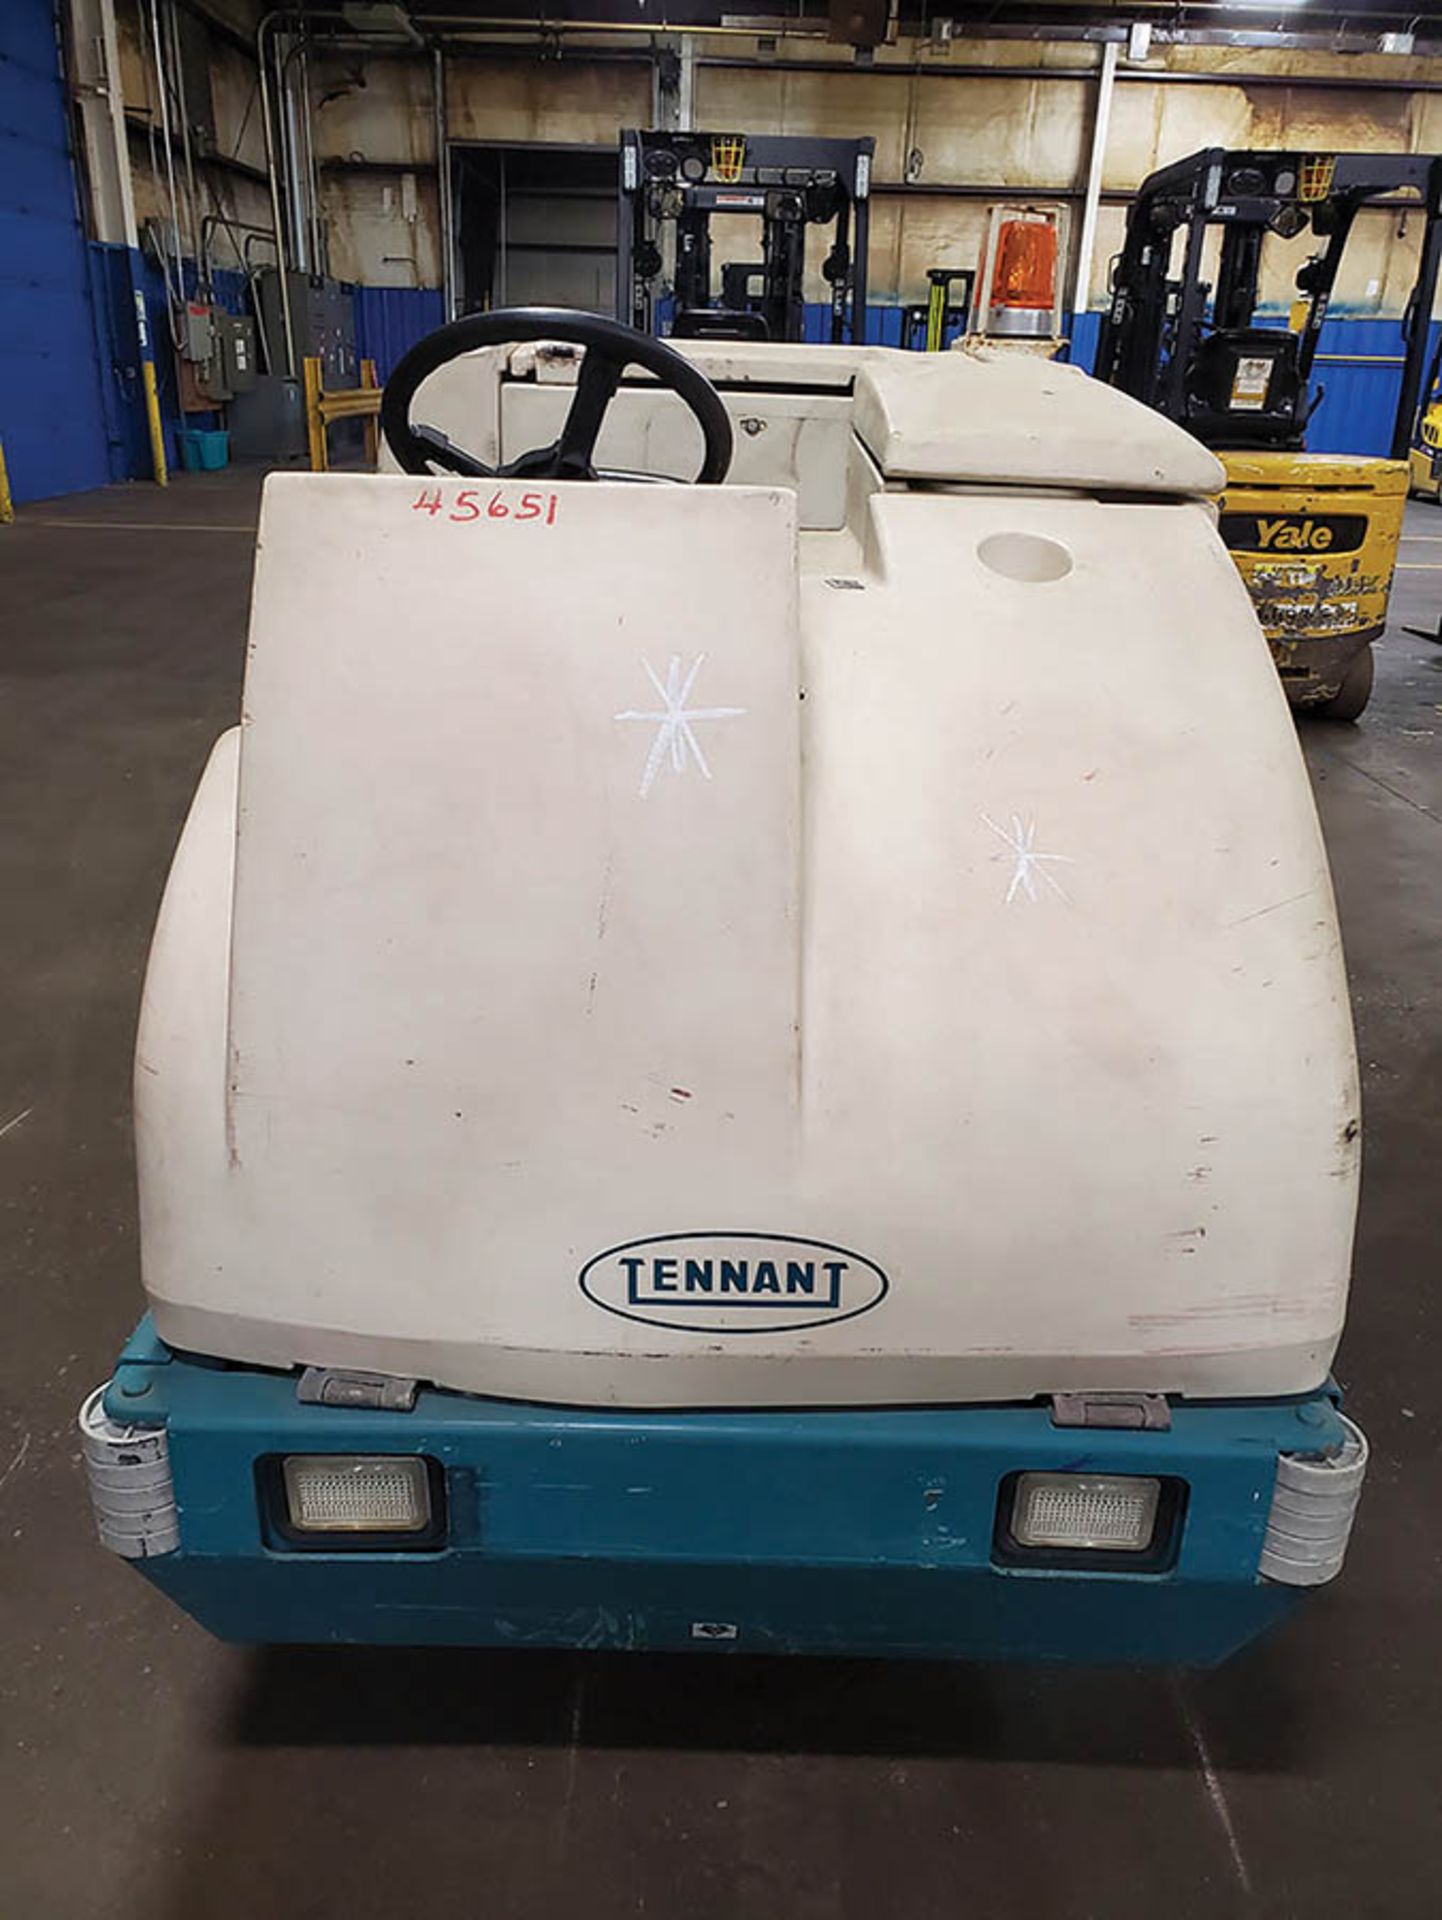 TENNANT RIDING FLOOR SCRUBBER, MODEL: 7300, S/N: 7300-1900, 36-VOLT, GVWT: 4,580, 1,297 HOURS - Image 6 of 15